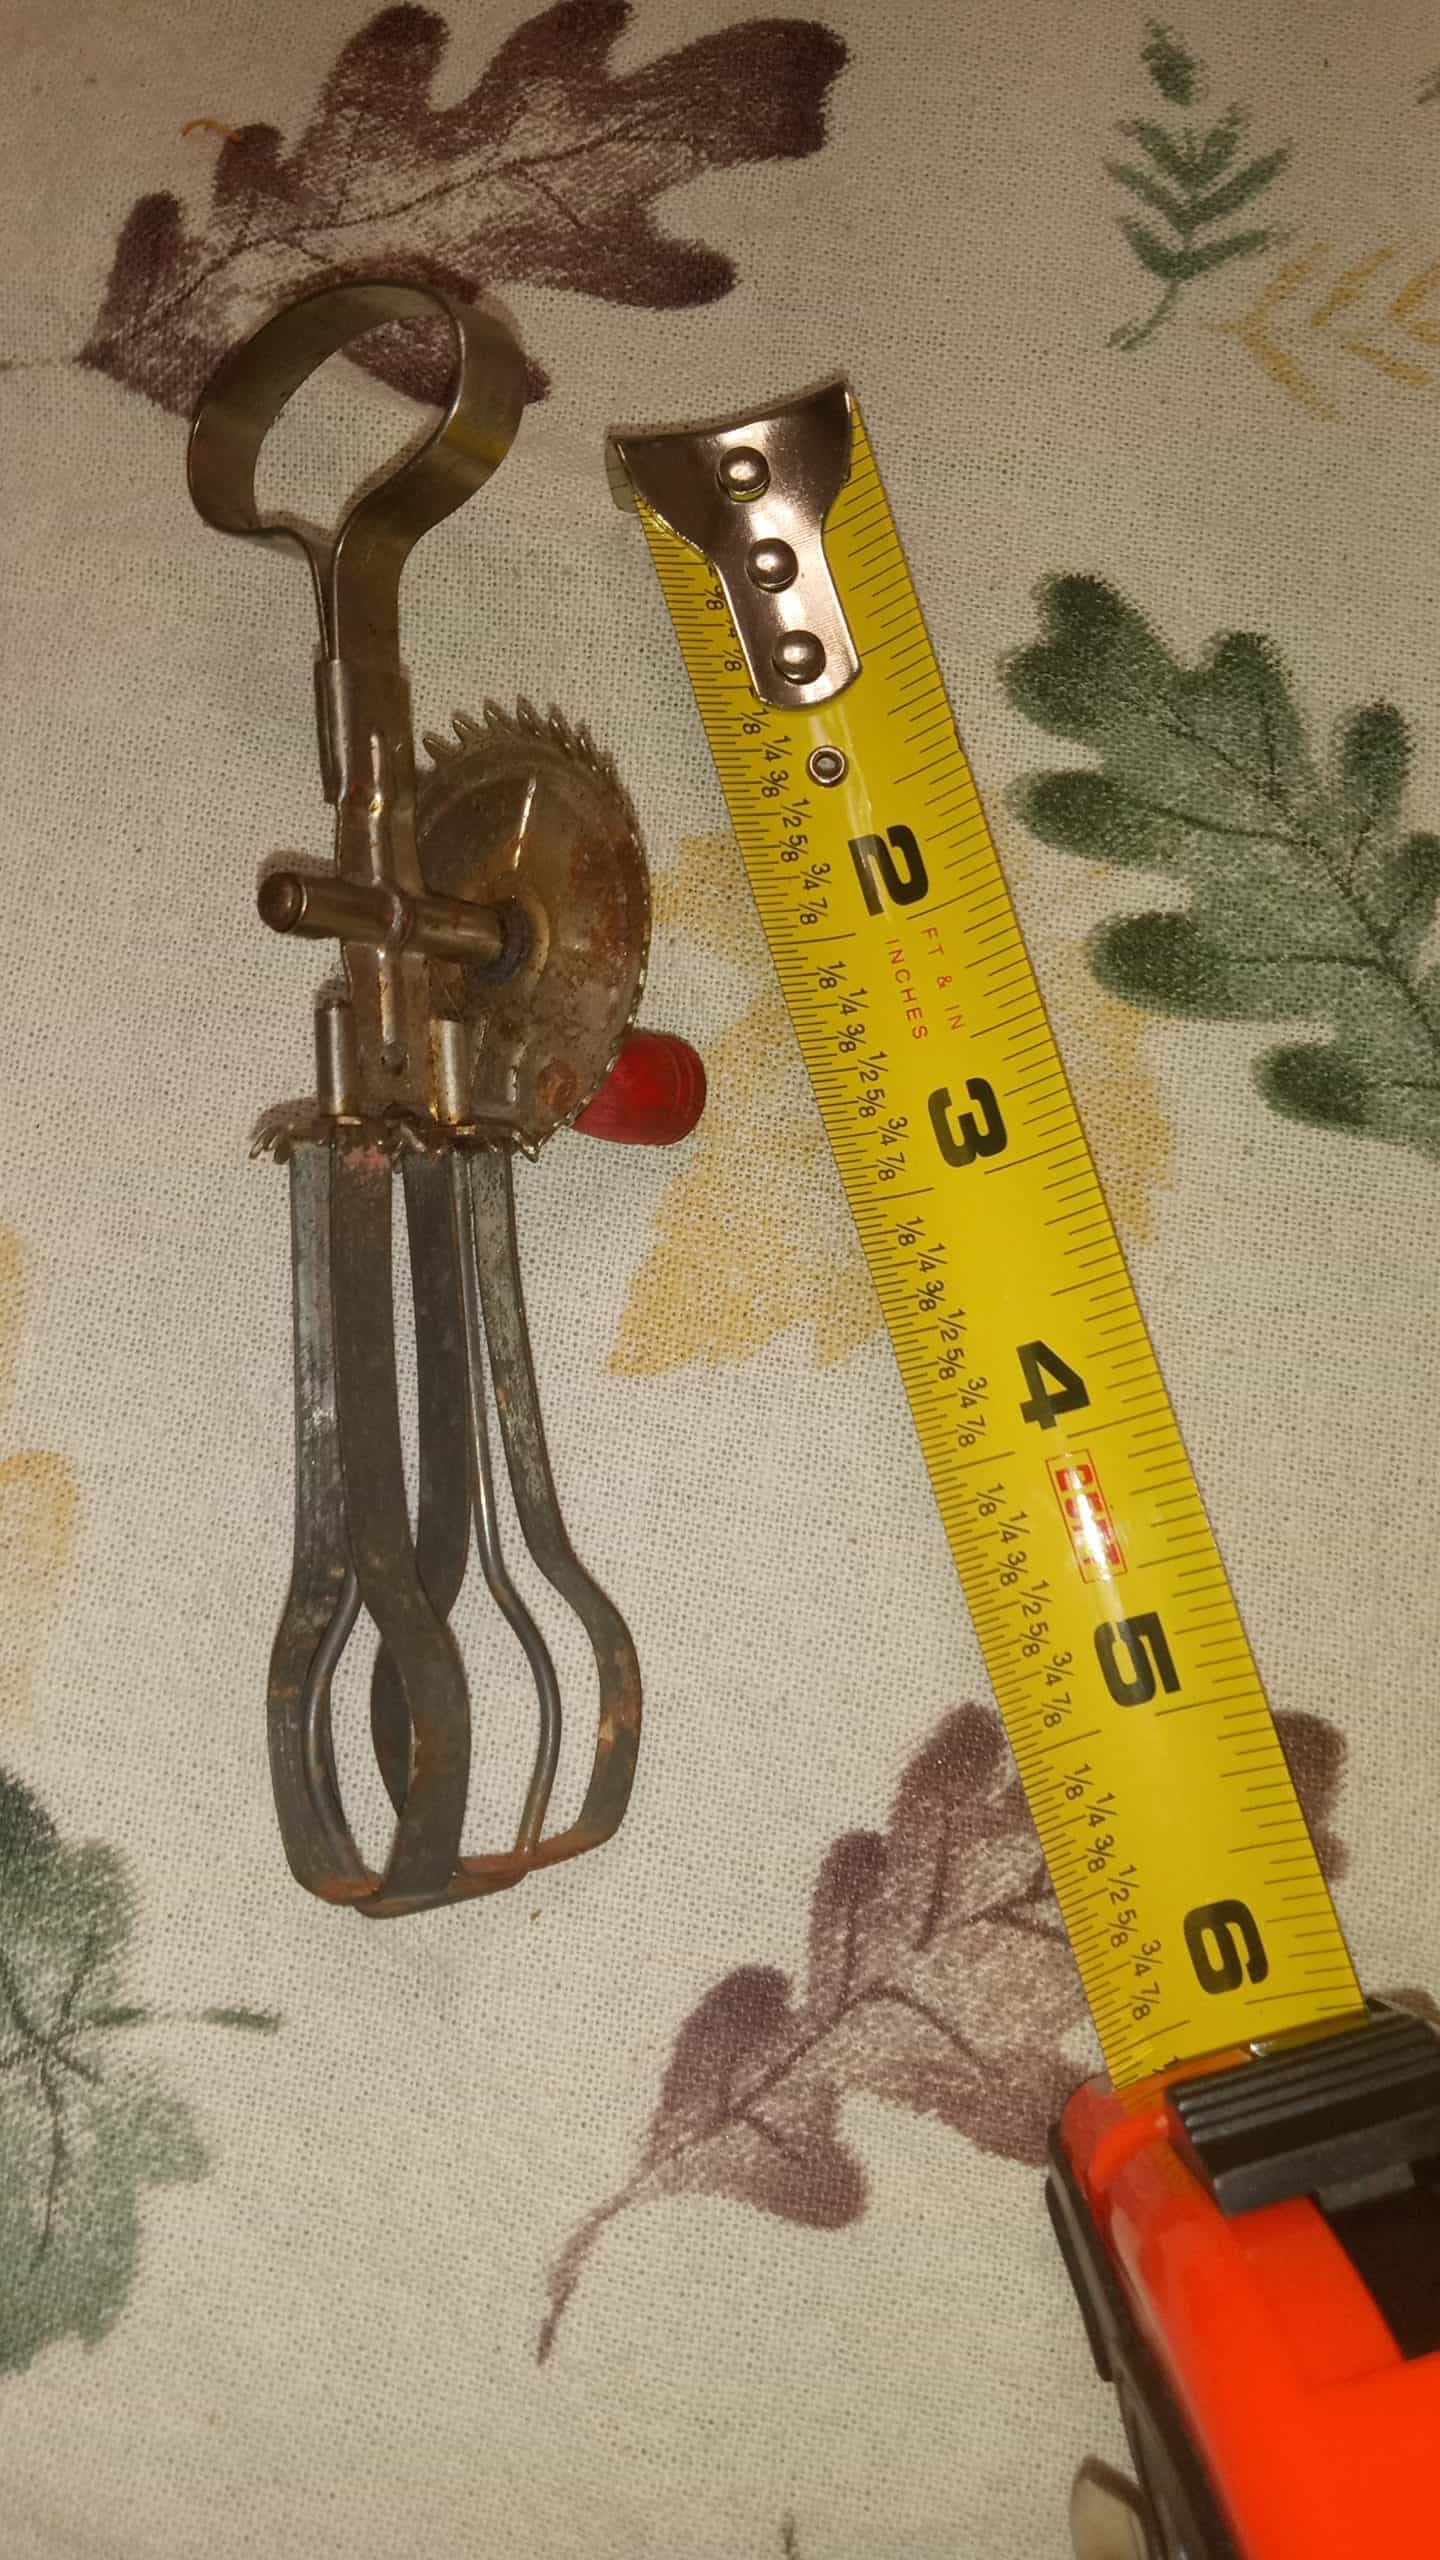 Vintage beater child’s toy